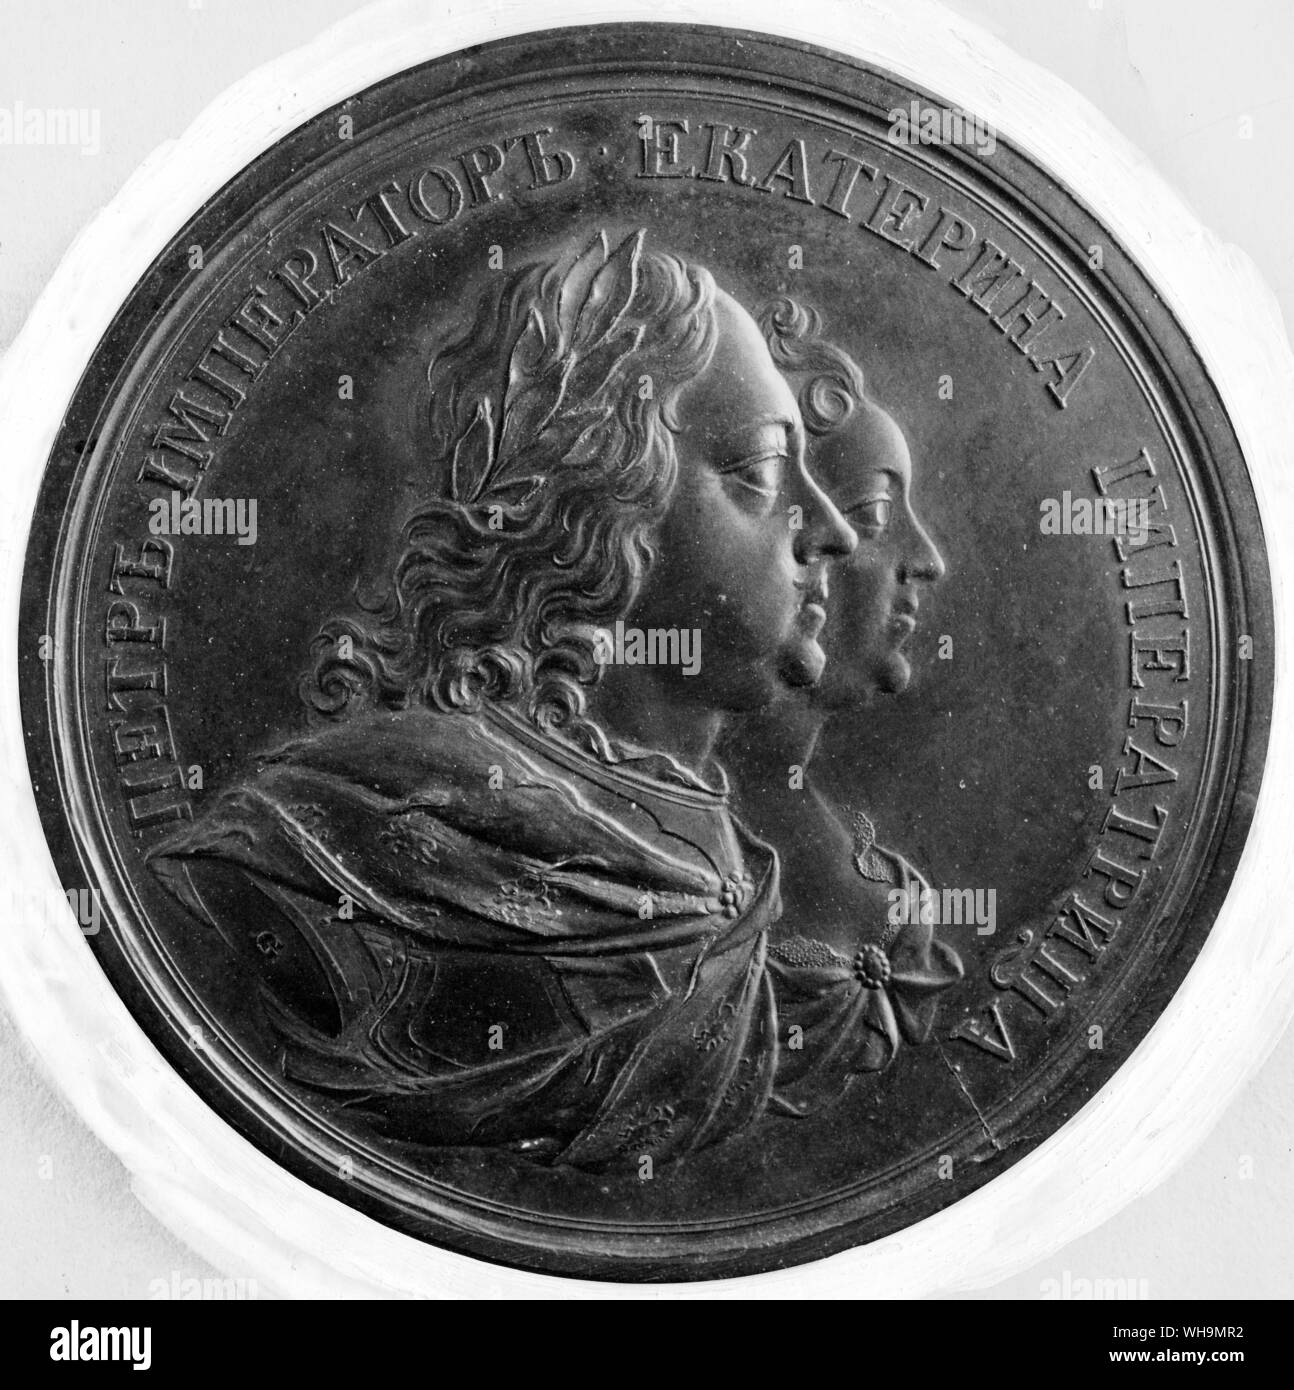 Peter (I) the Great (1672-1725), Tsar from 1682. Medal showing profiles of Peter I and his wife, Catherine. Stock Photo